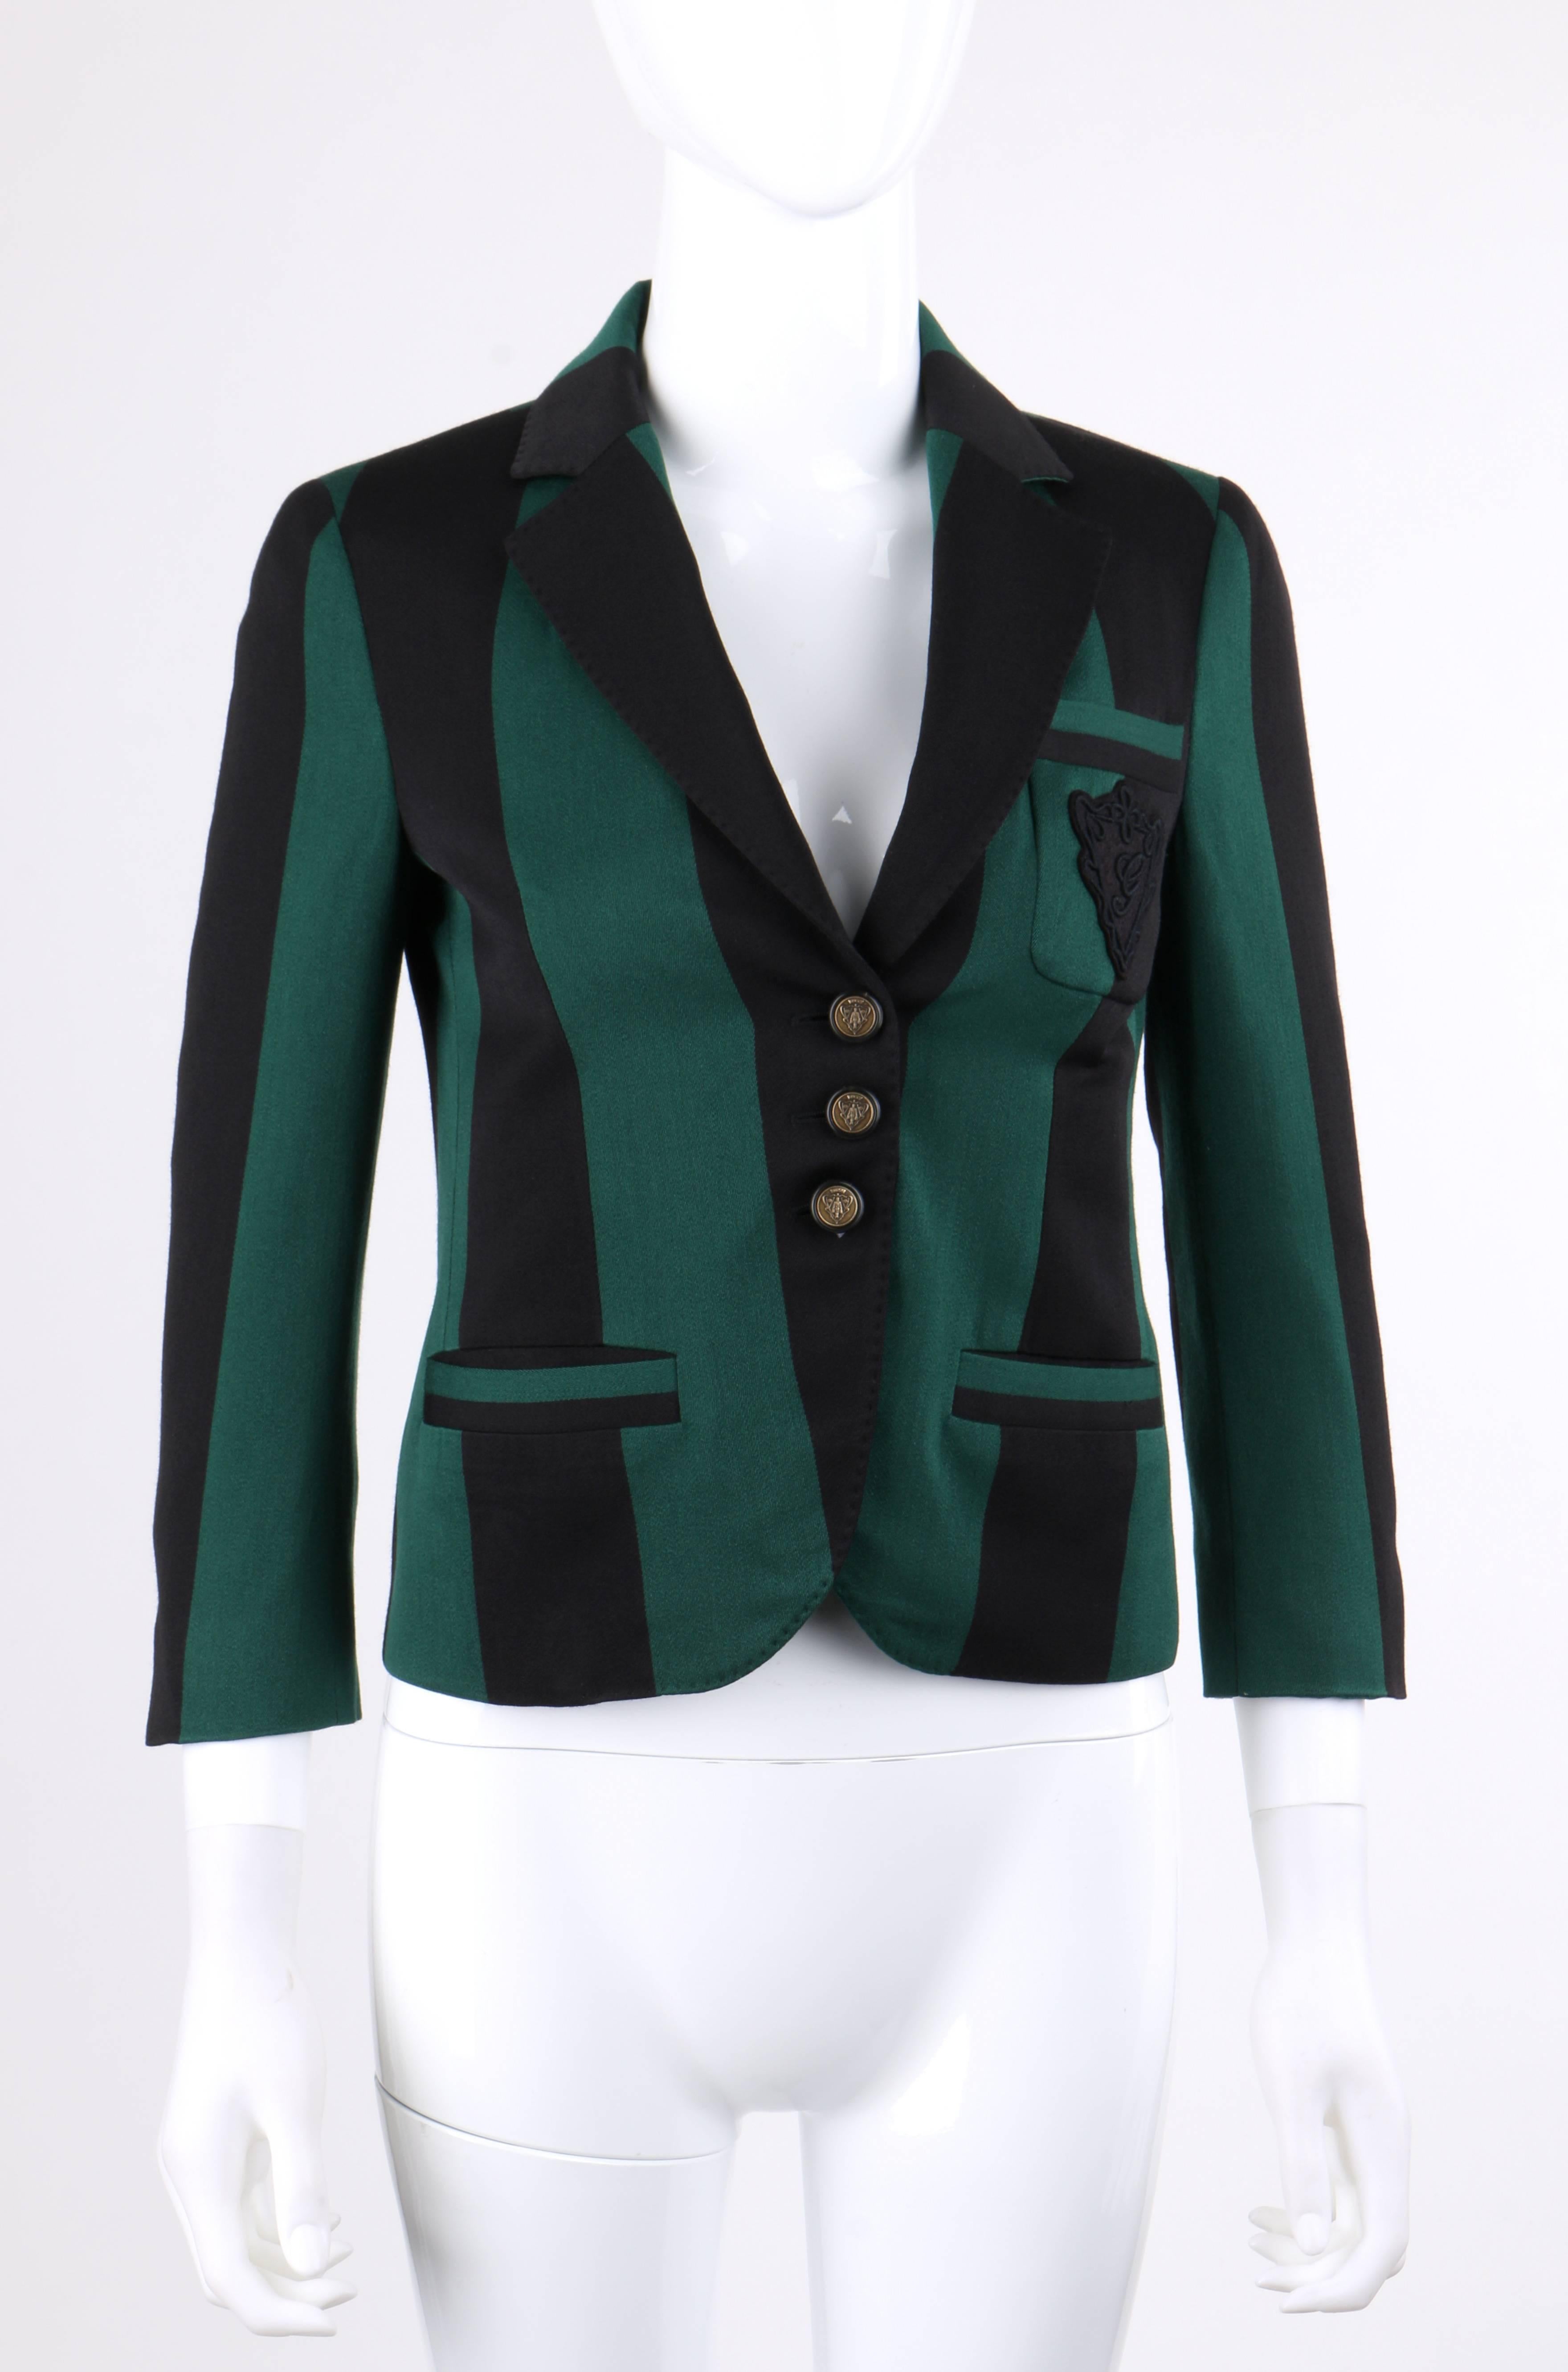 Gucci Spring/Summer 2009 green & black striped wool prep school blazer. Notched lapel collar. Three center front button closures. Brass-toned and black 